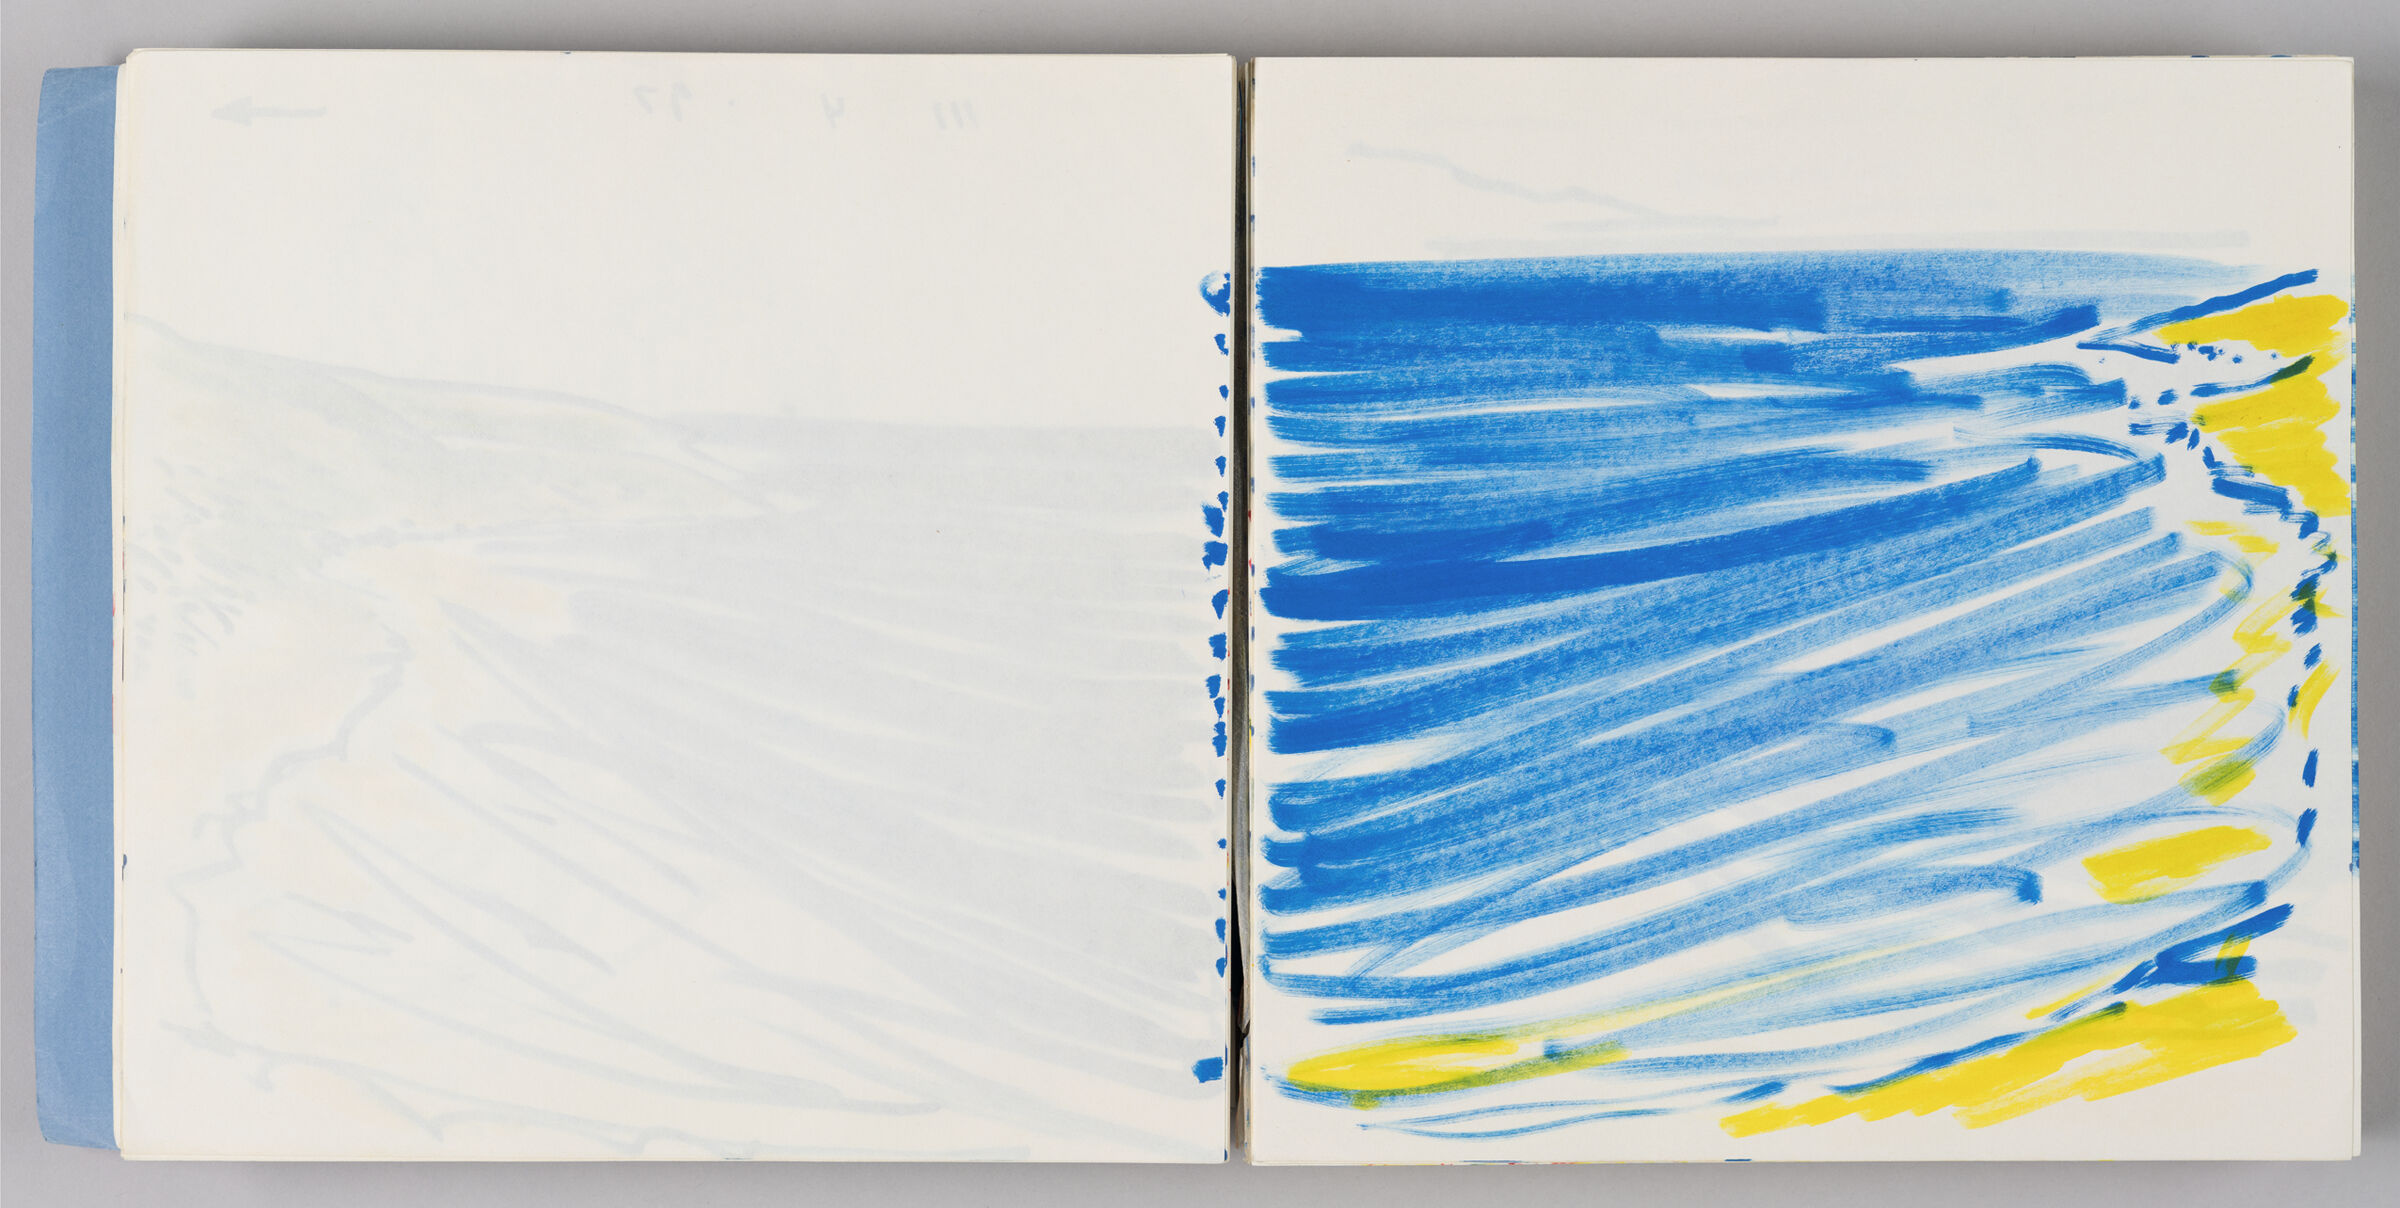 Untitled (Bleed-Through Of Previous Page, Left Page); Untitled (Essaouira Beach, Right Page)